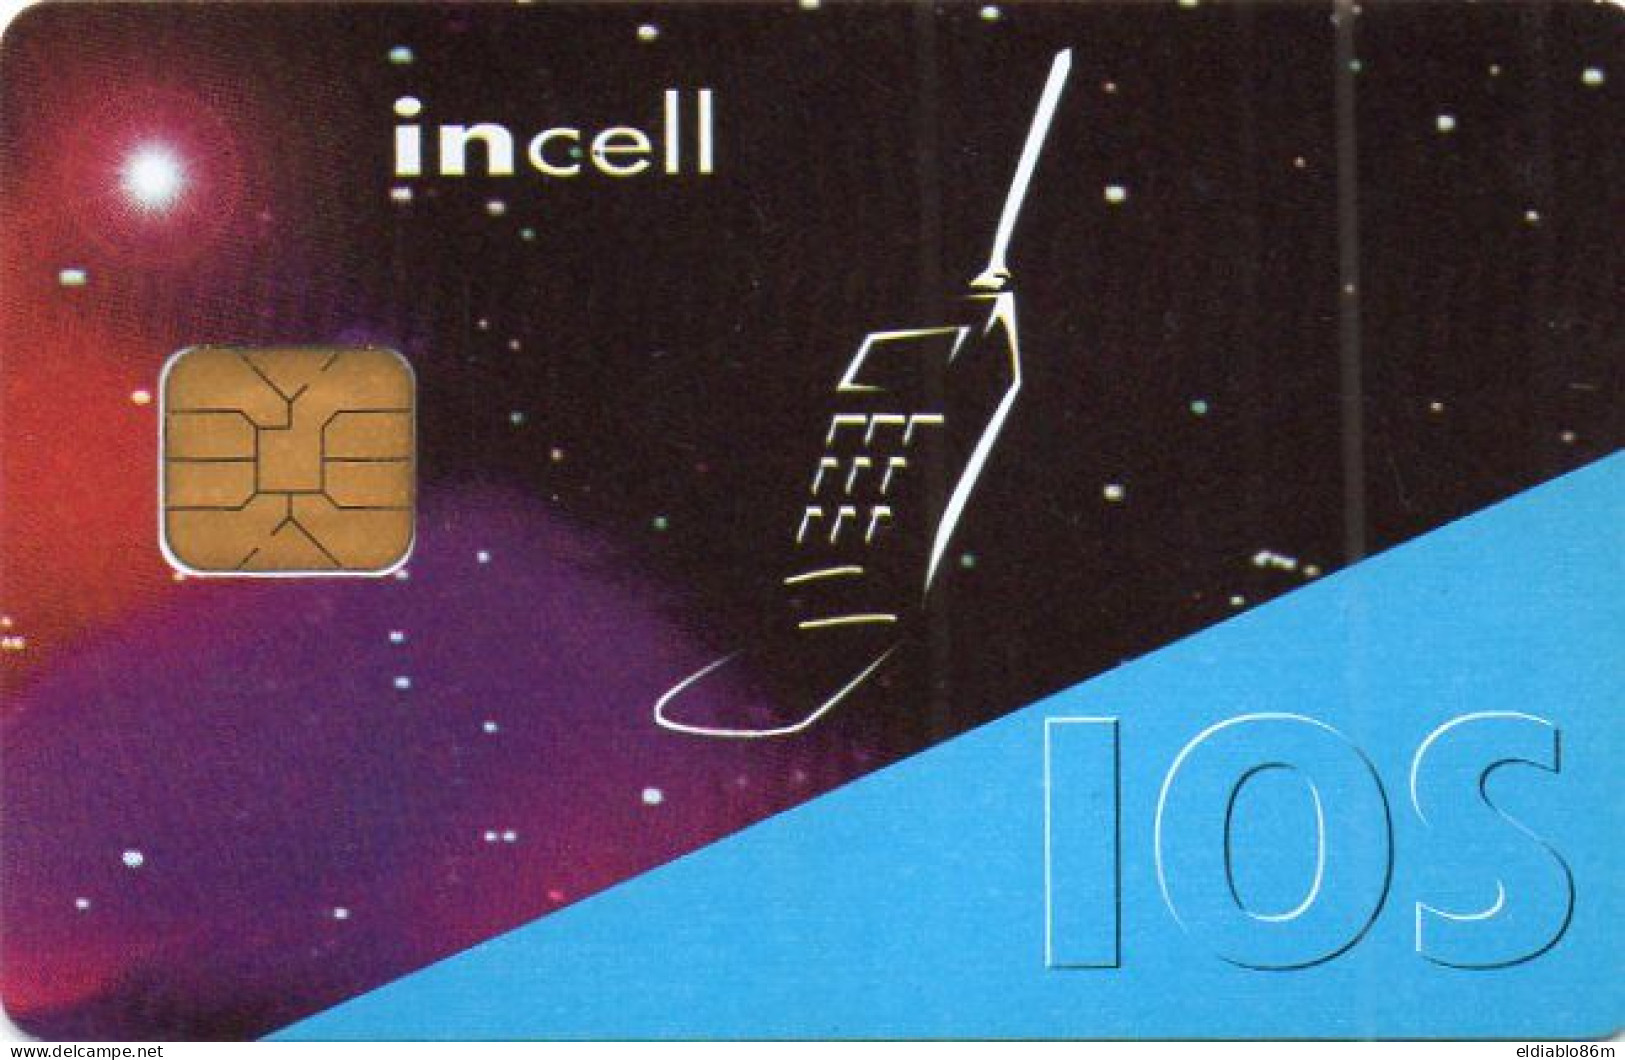 ITALY - CHIP CARD - TEST CARD - INCARD - INCELL IOS - SUBSCRIBER ID CARD BASIC - C&C 5509 - Tests & Servizi